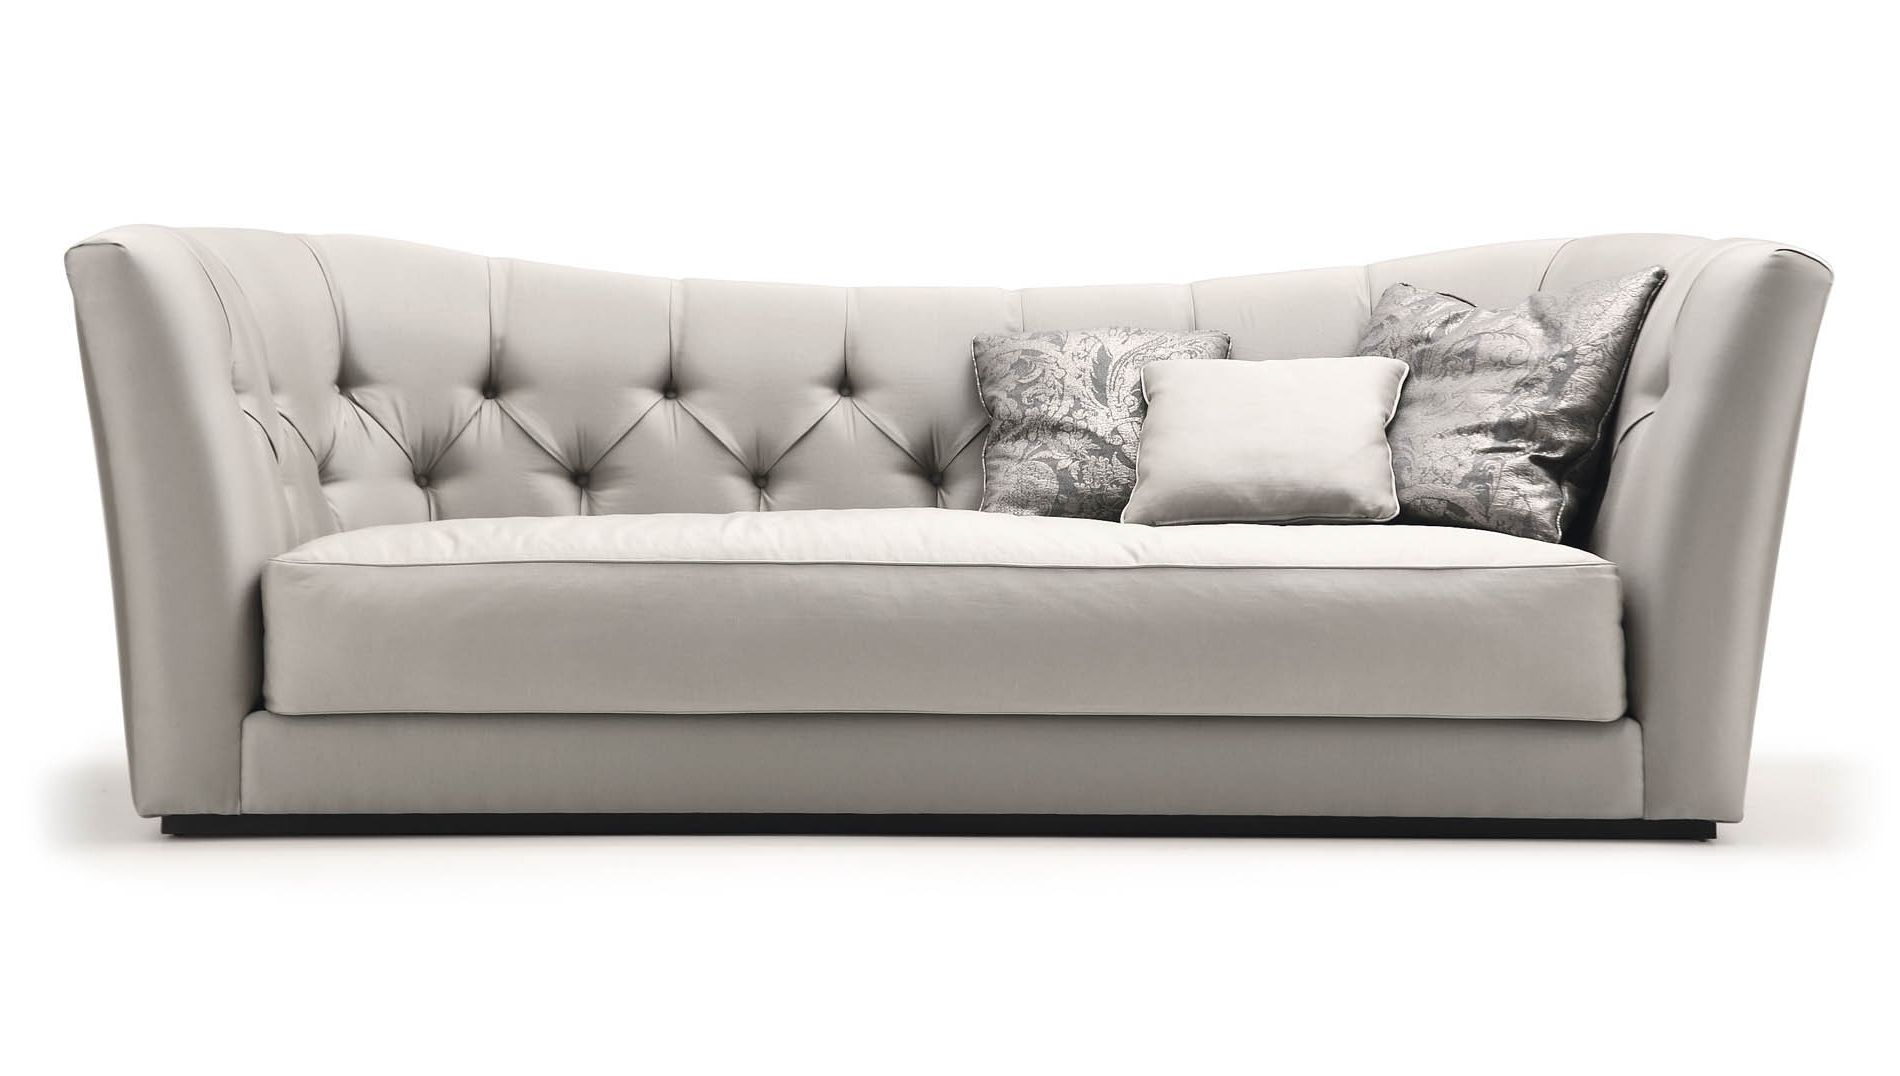 Preferred Modern 3 Seater Sofas Intended For Contemporary, Butterfly 3 Seater Sofa , Buy Online At Luxdeco (Photo 1 of 20)